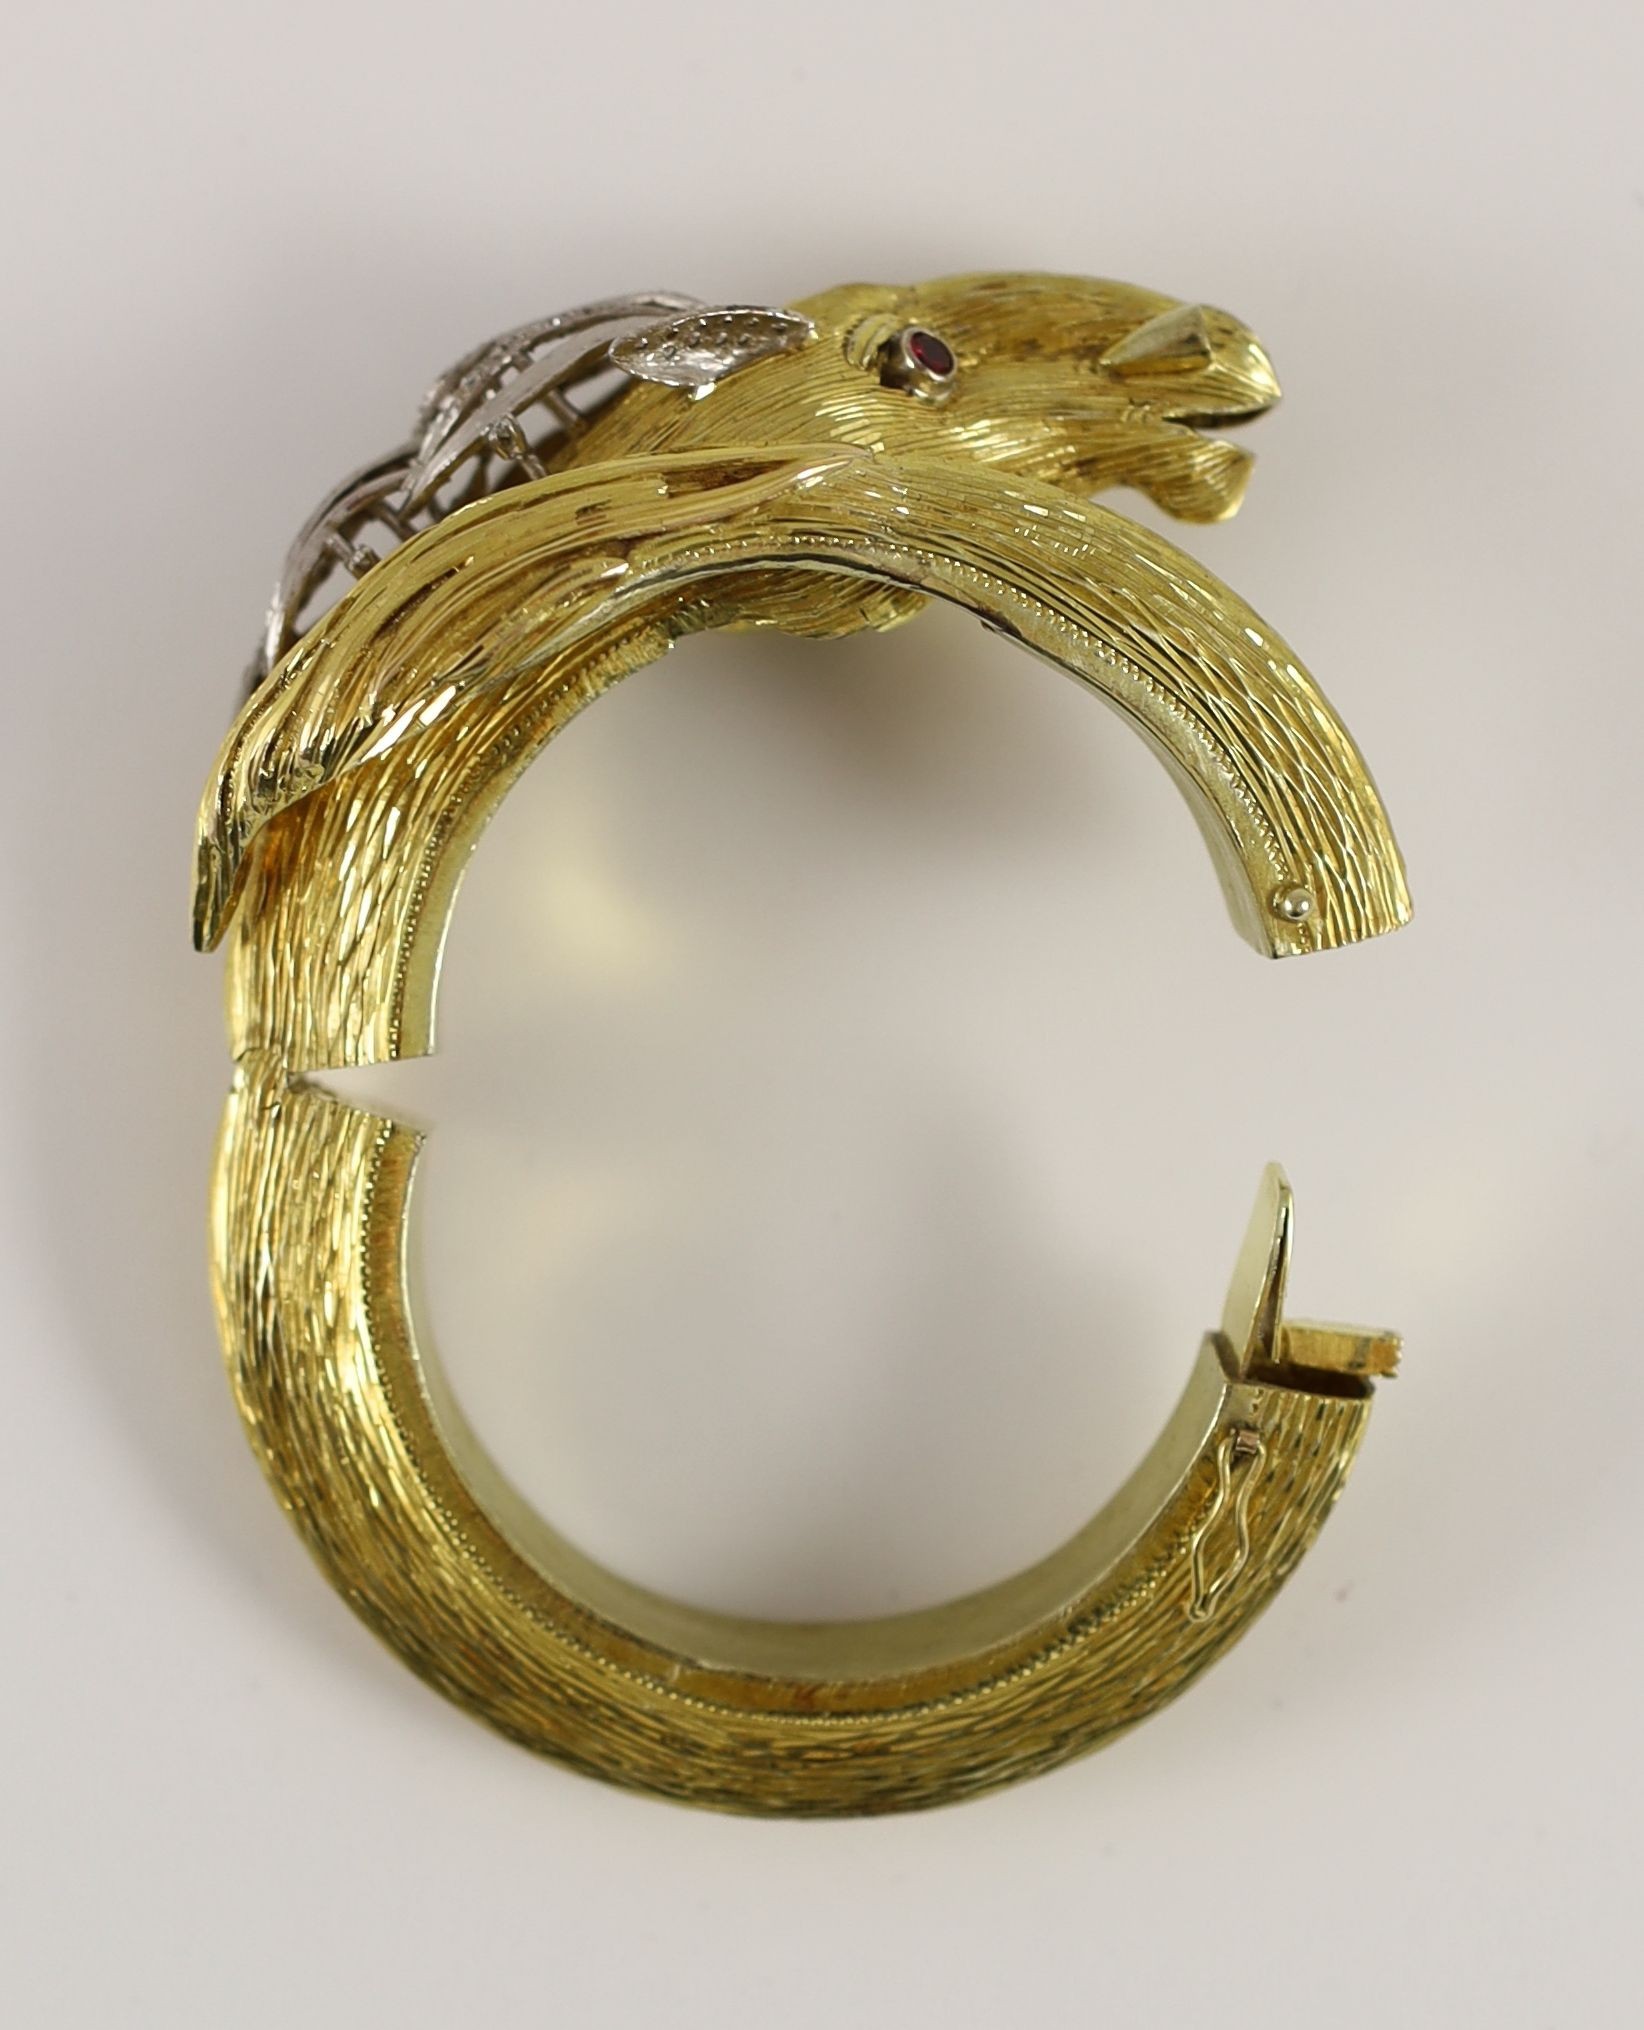 A 20th century Continental textured 14k gold, ruby and diamond set hinged bangle, modelled as the head and tail of a horse